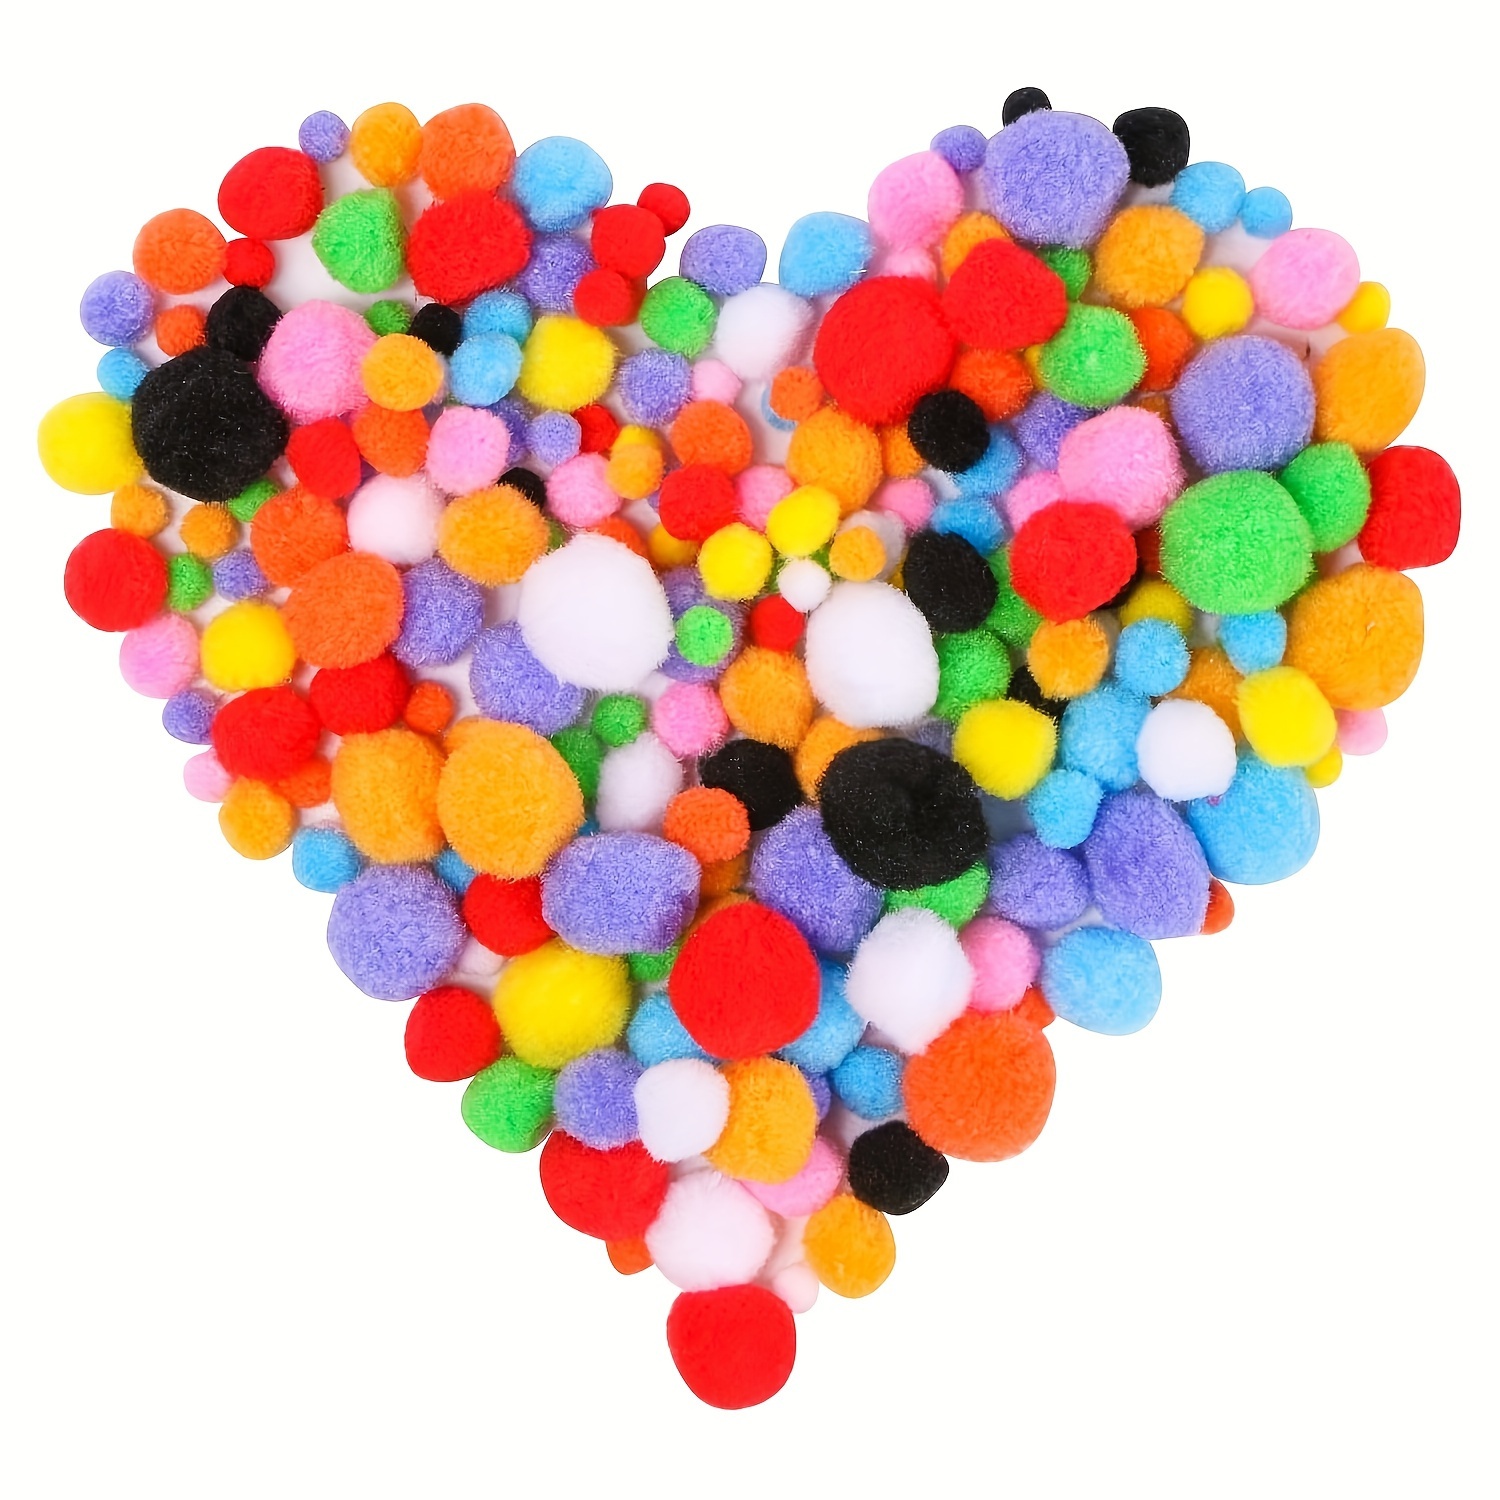 500pcs 1 Inch 24 Colors Pompoms Arts And Crafts Pom Poms Balls For Hobby  Supplies And Creative Craft DIY Material